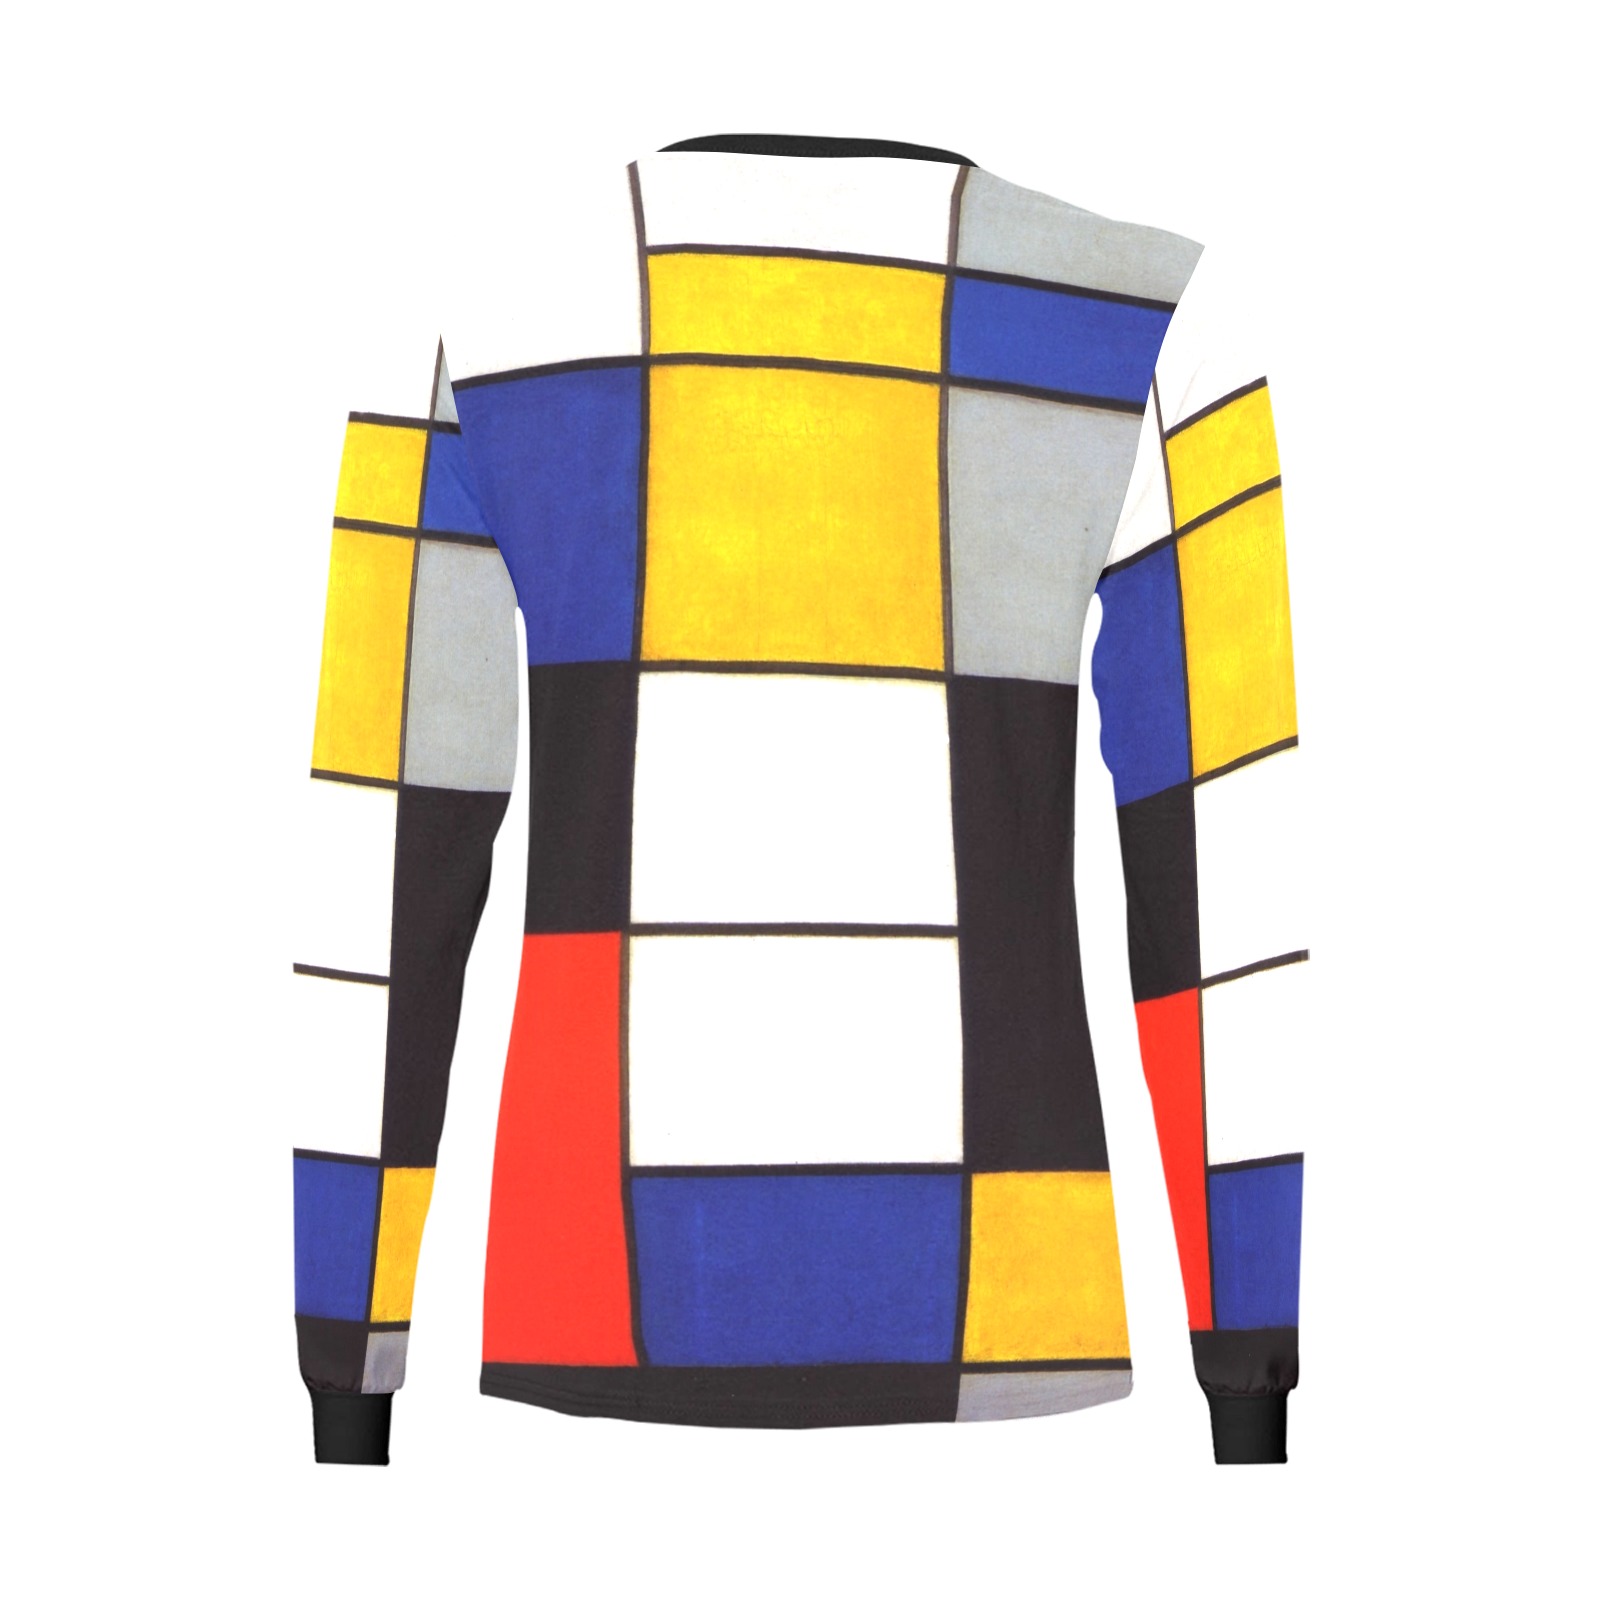 Composition A by Piet Mondrian Women's All Over Print Long Sleeve T-shirt (Model T51)